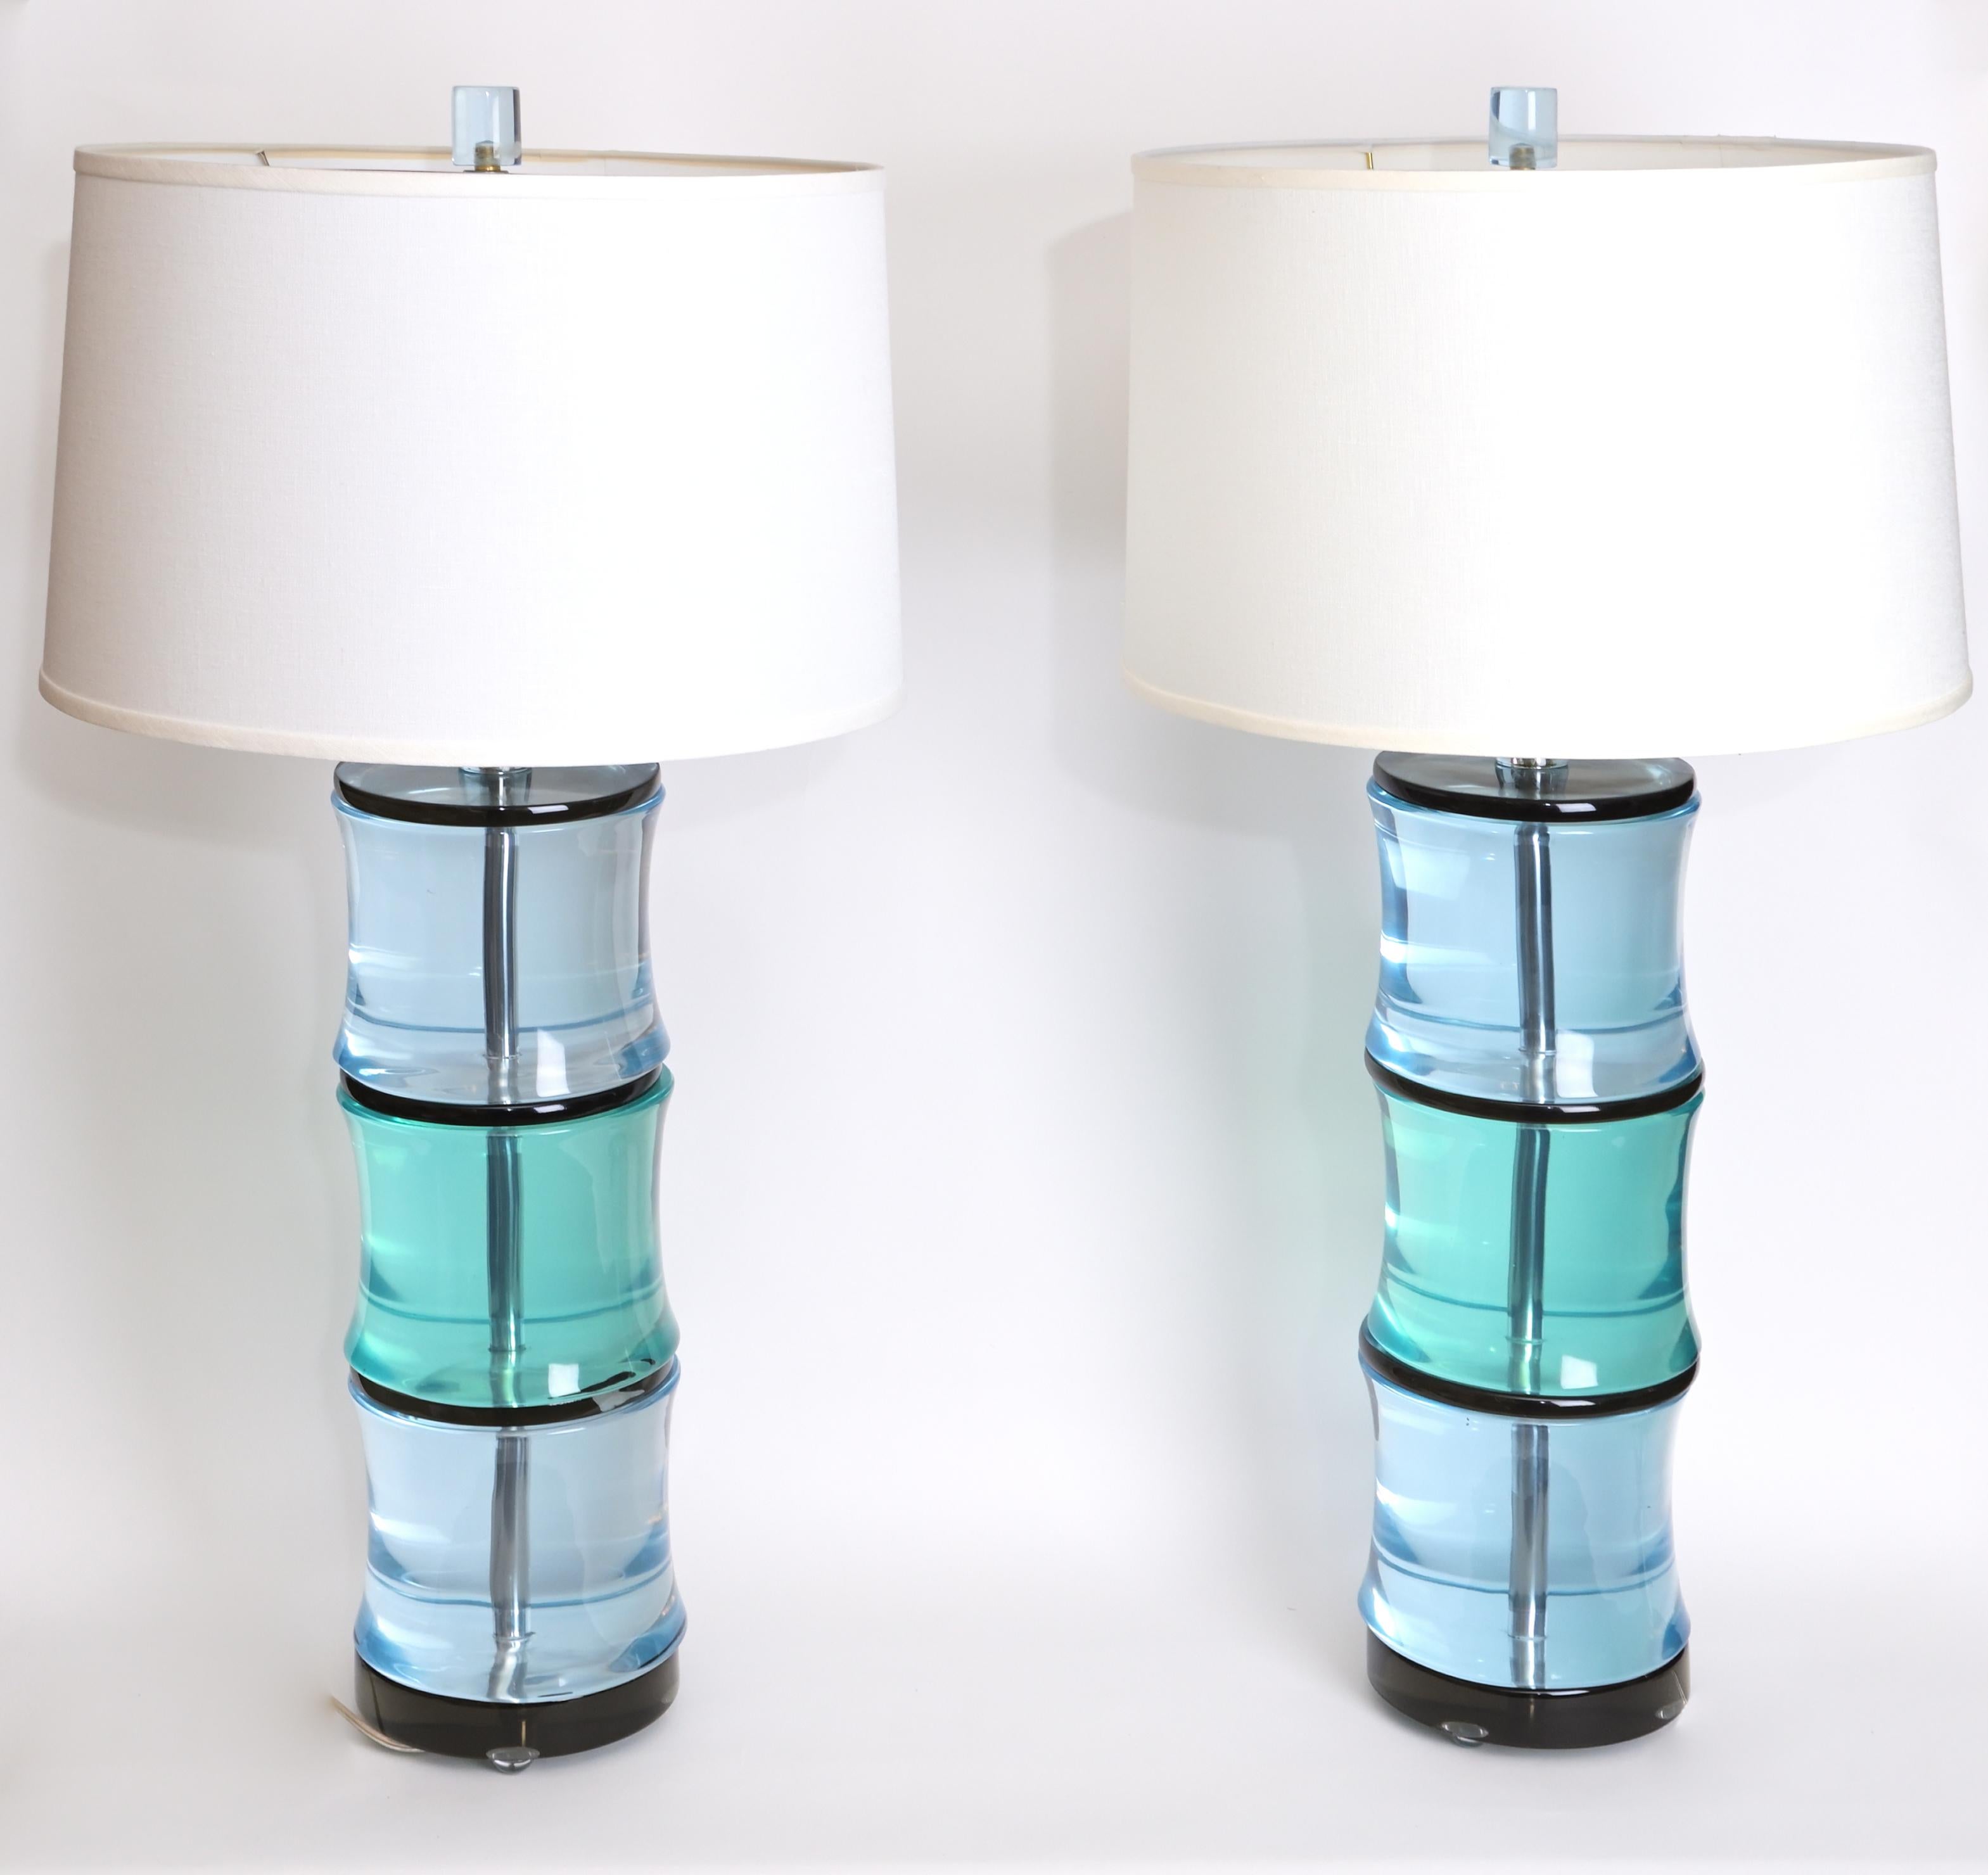 The Somerset Table lamps-- A pair of table lamps with peridot and aquamarine transparent cast resin sections with smokey topaz dividers forming bamboo-shaped lamp bases. Each lamp can accommodate two medium base light bulbs with 100 watts. Designed